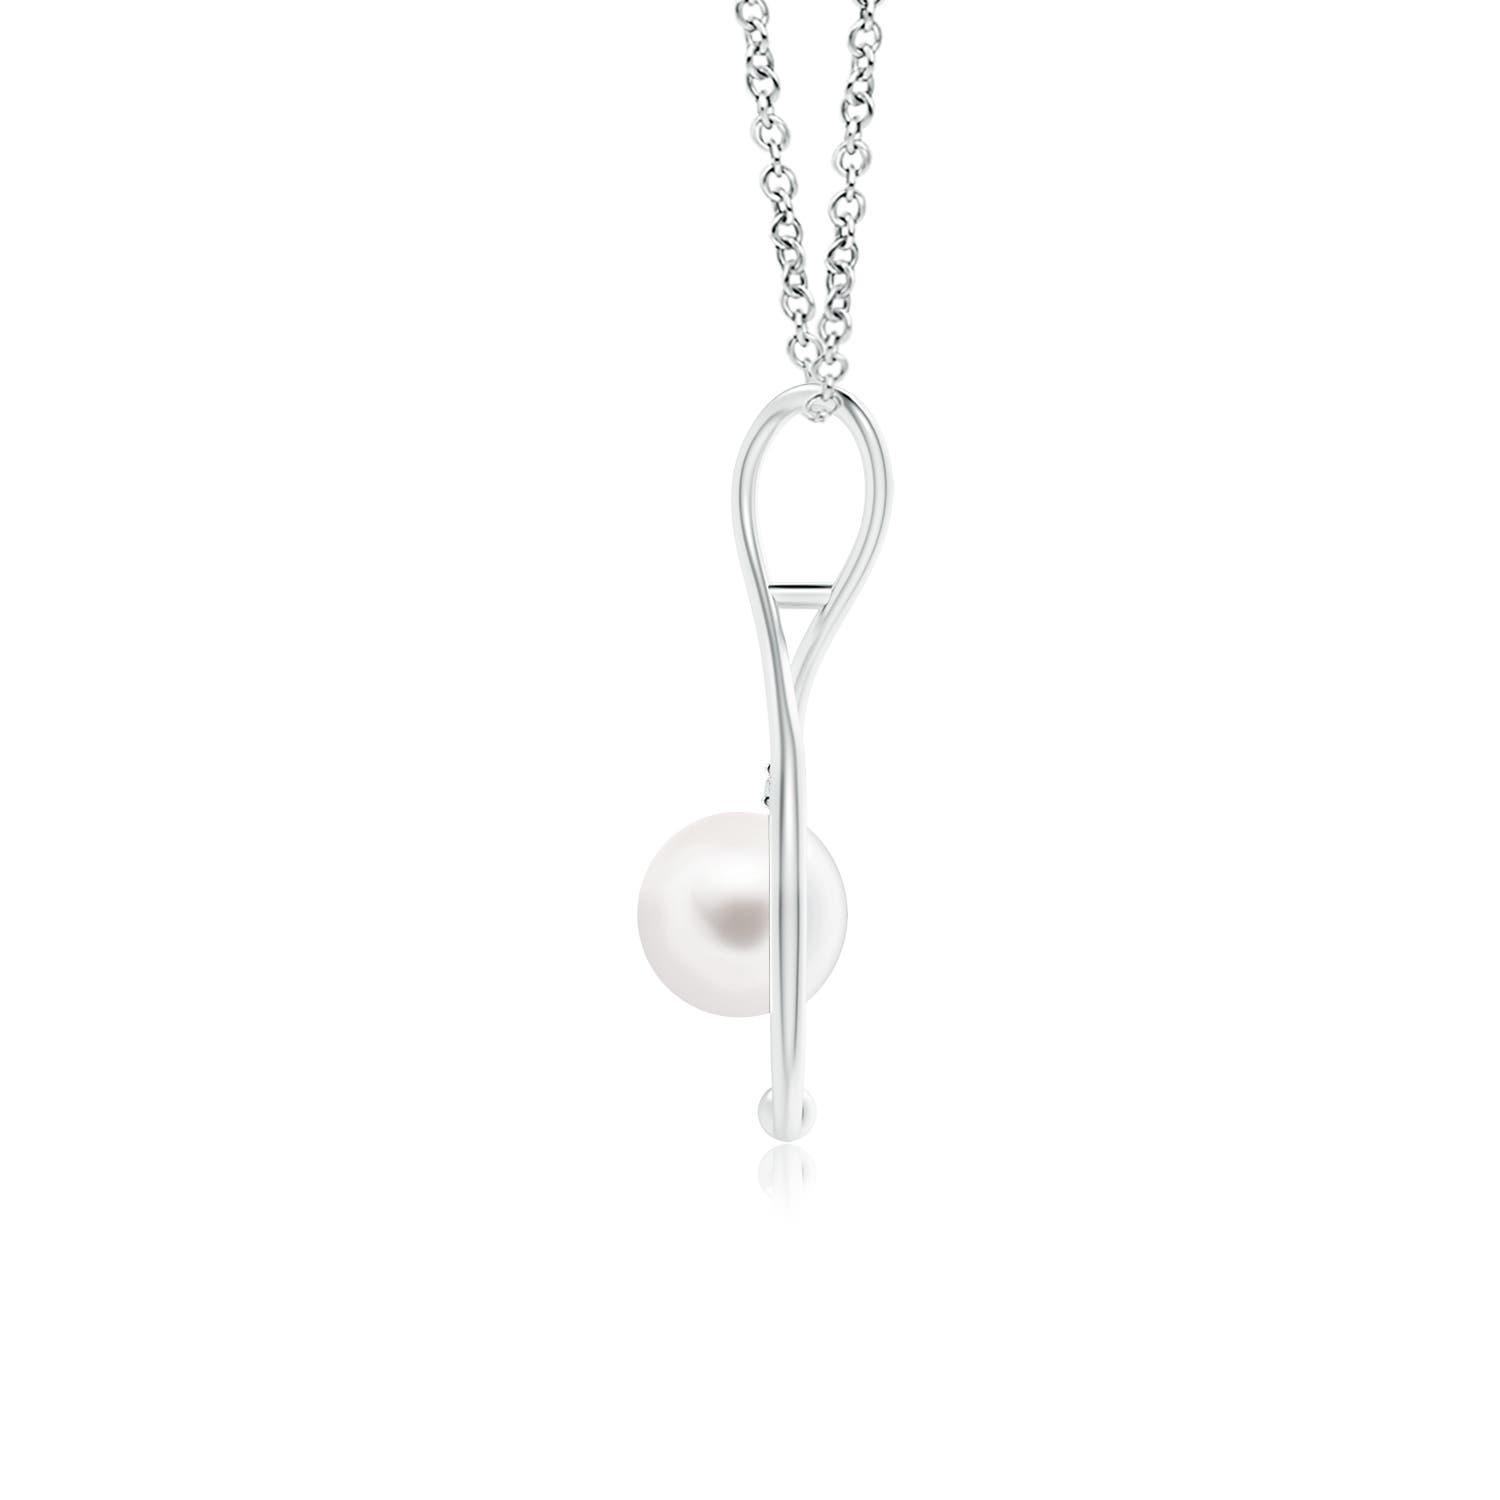 A modern classic, this pearl infinity necklace in 14K white gold is a beautiful interpretation of the popular infinity symbol. The infinity loop softly cuddles the round Freshwater cultured pearl to evoke a feeling of tenderness. The glimmering